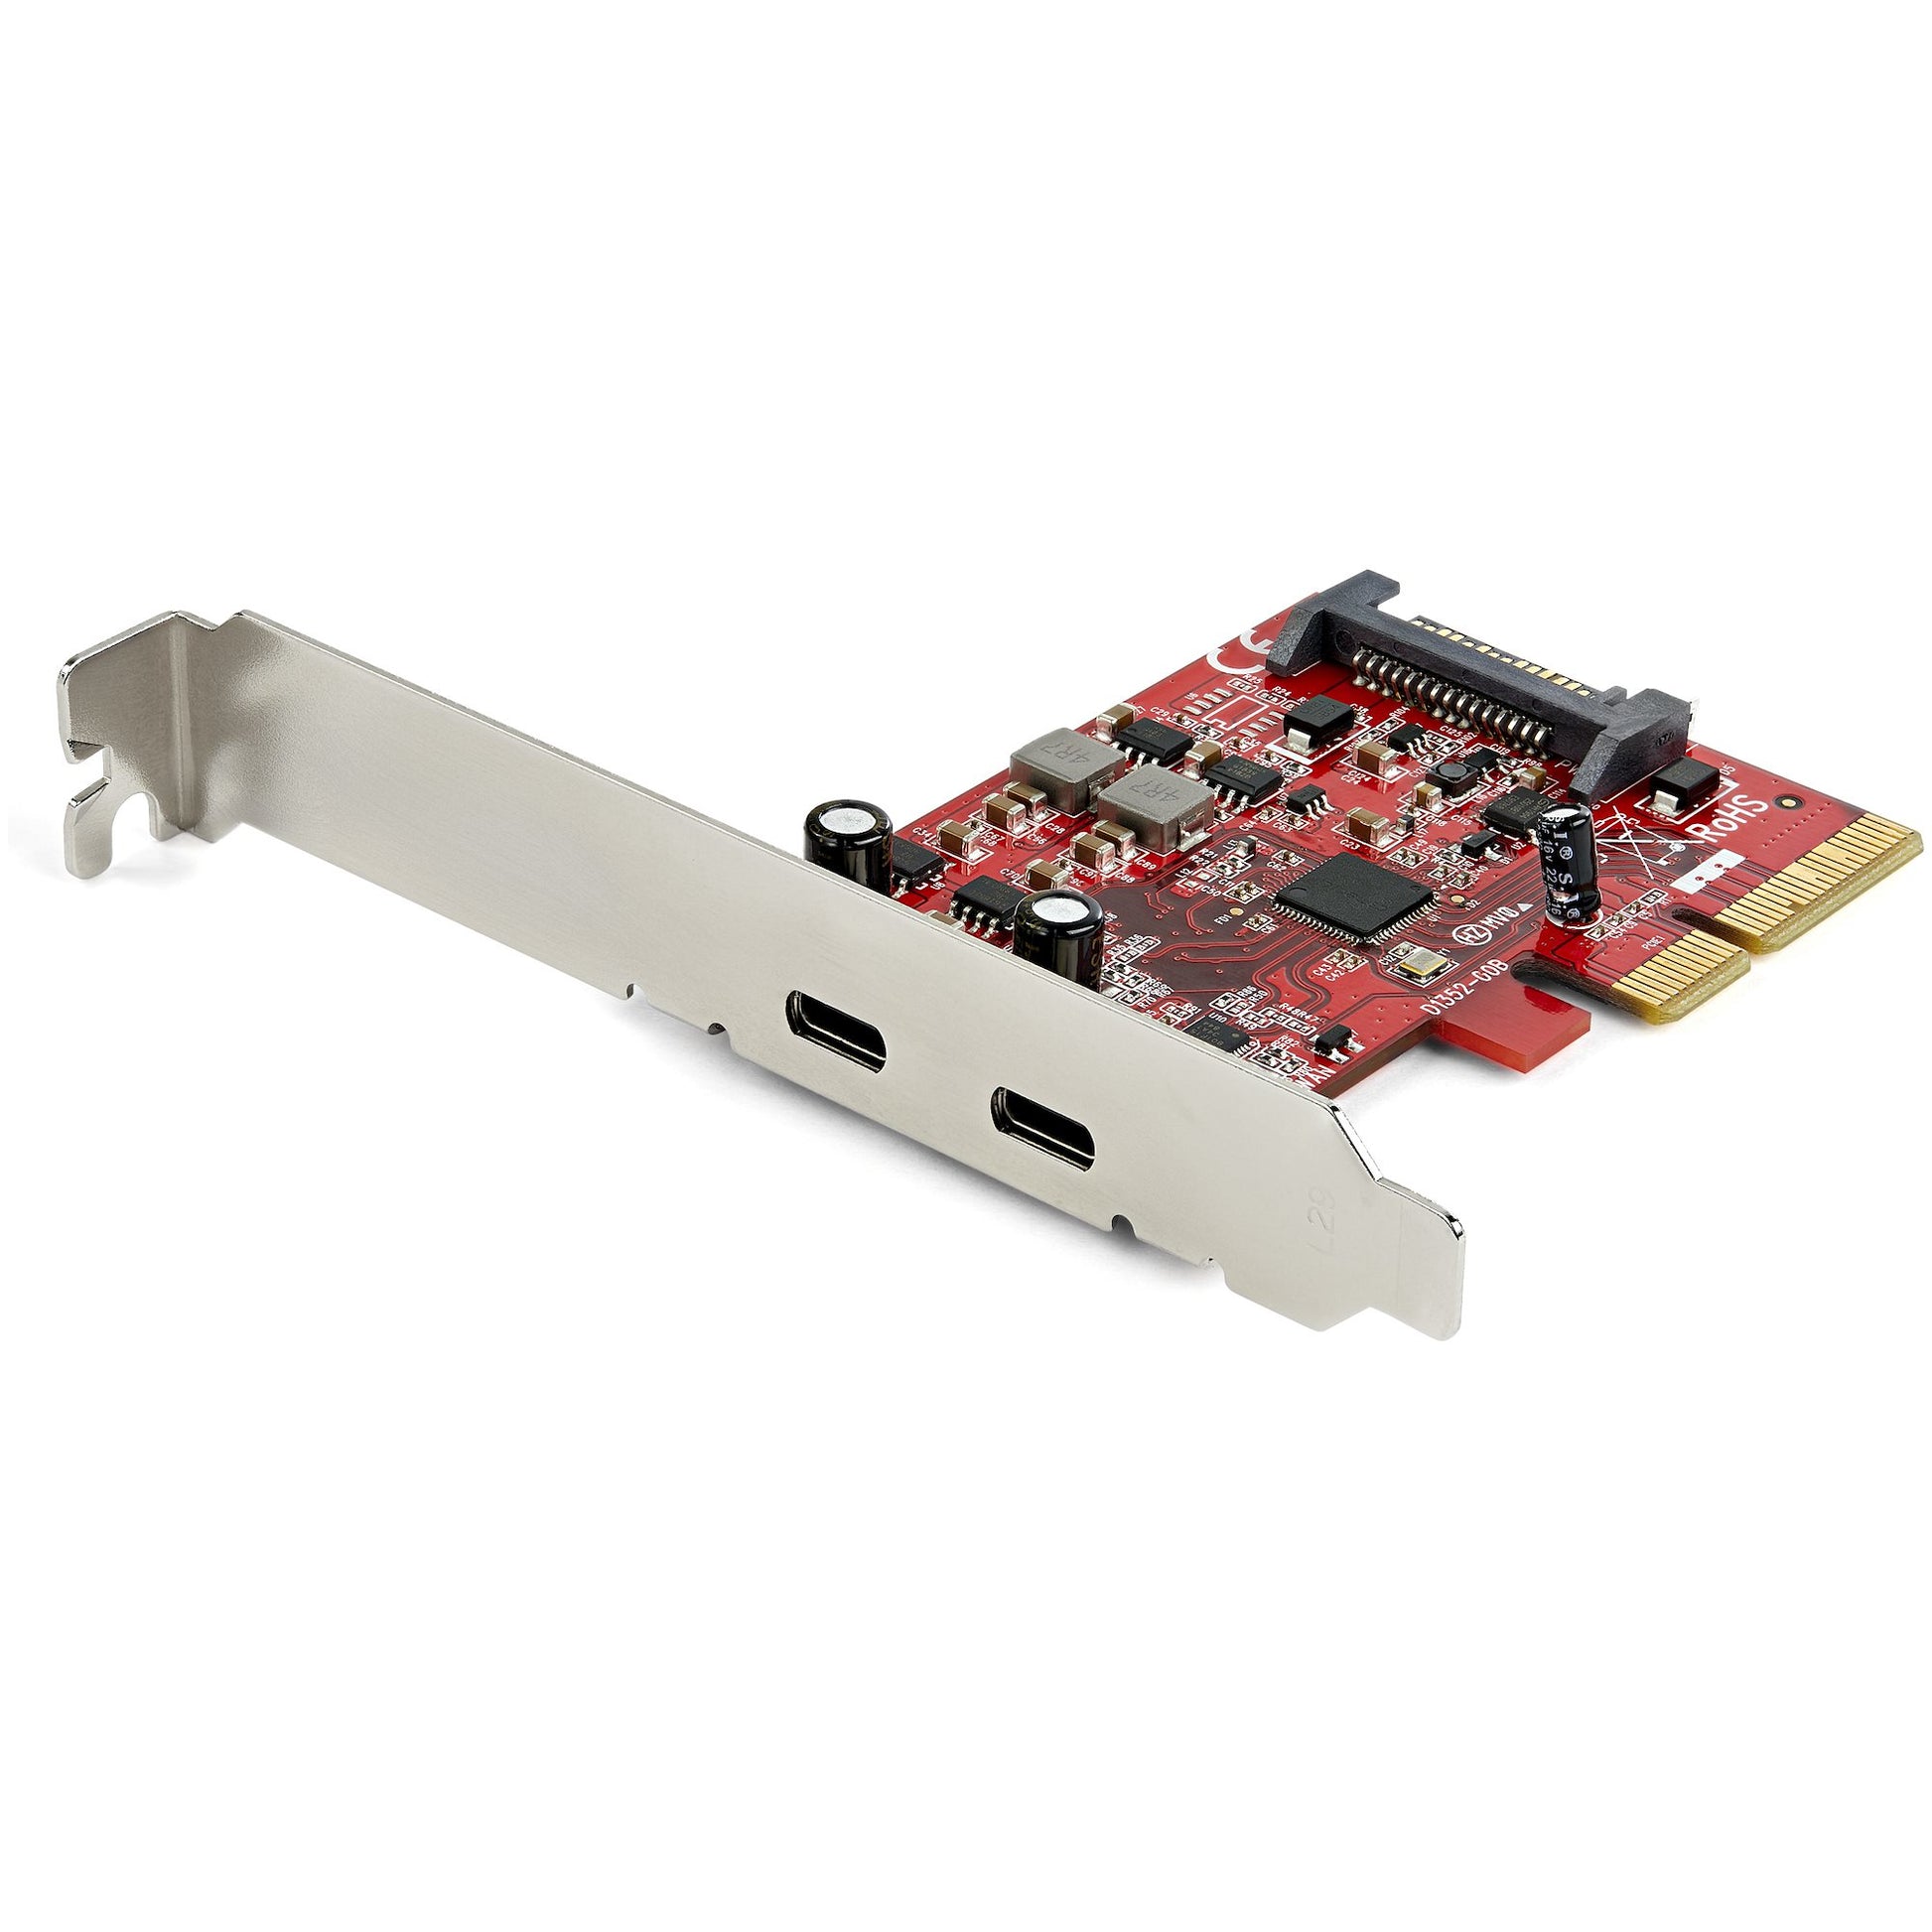 StarTech.com 2-port 10Gbps USB C PCIe Card - USB 3.1 Gen 2 Type-C PCI Express Host Controller Add-On Card - Expansion Card - USB 3.2 Gen 2x1 PCIe Adapter 15W/port - Windows, macOS, Linux-0